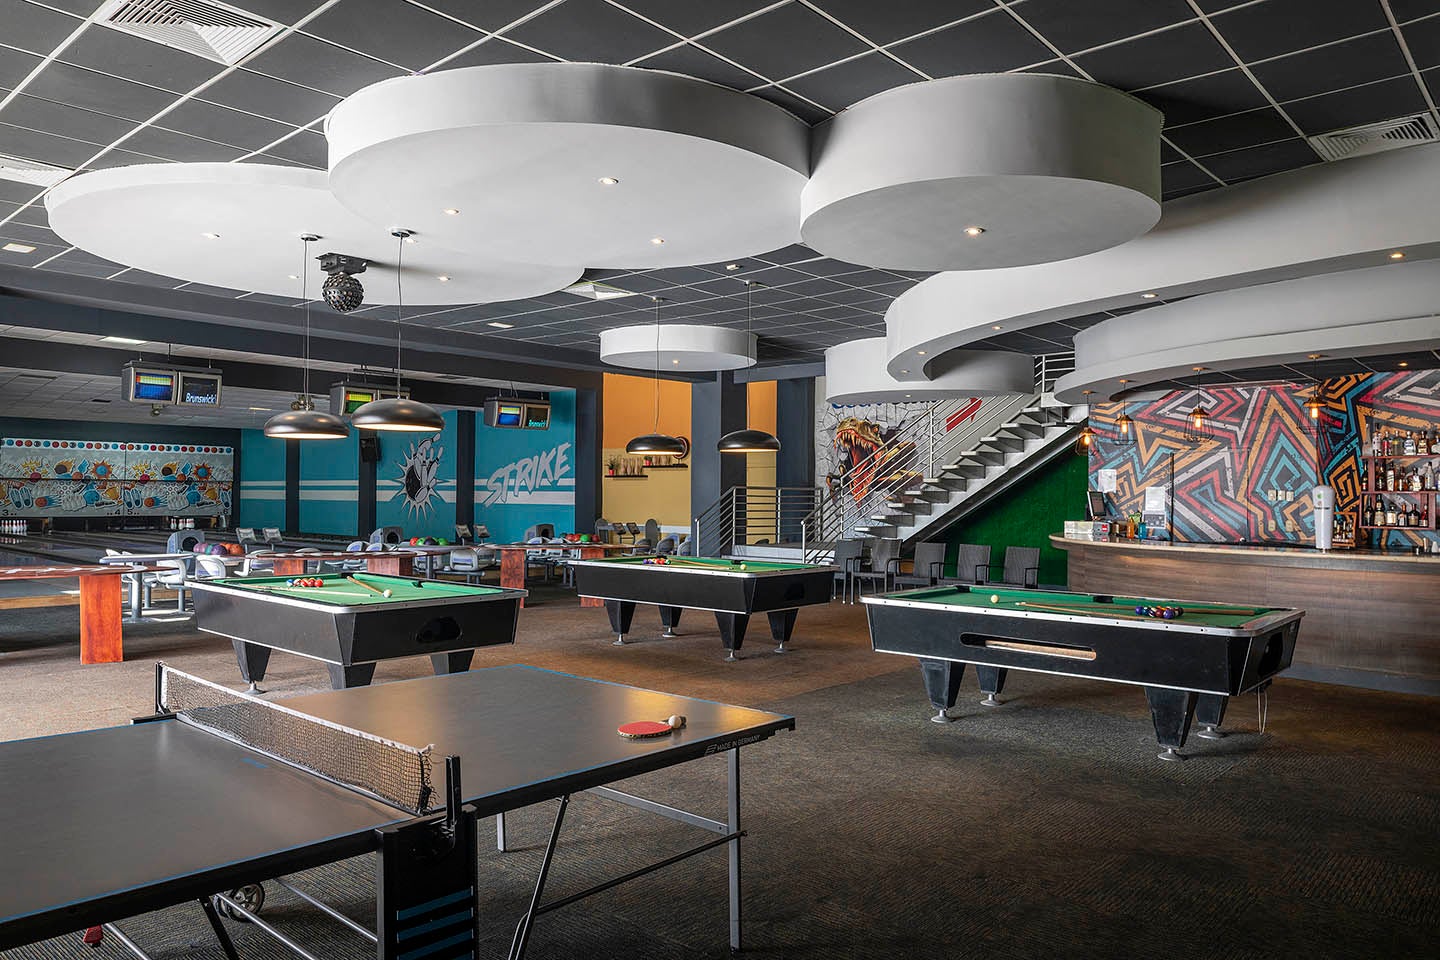 Bowling alley games area